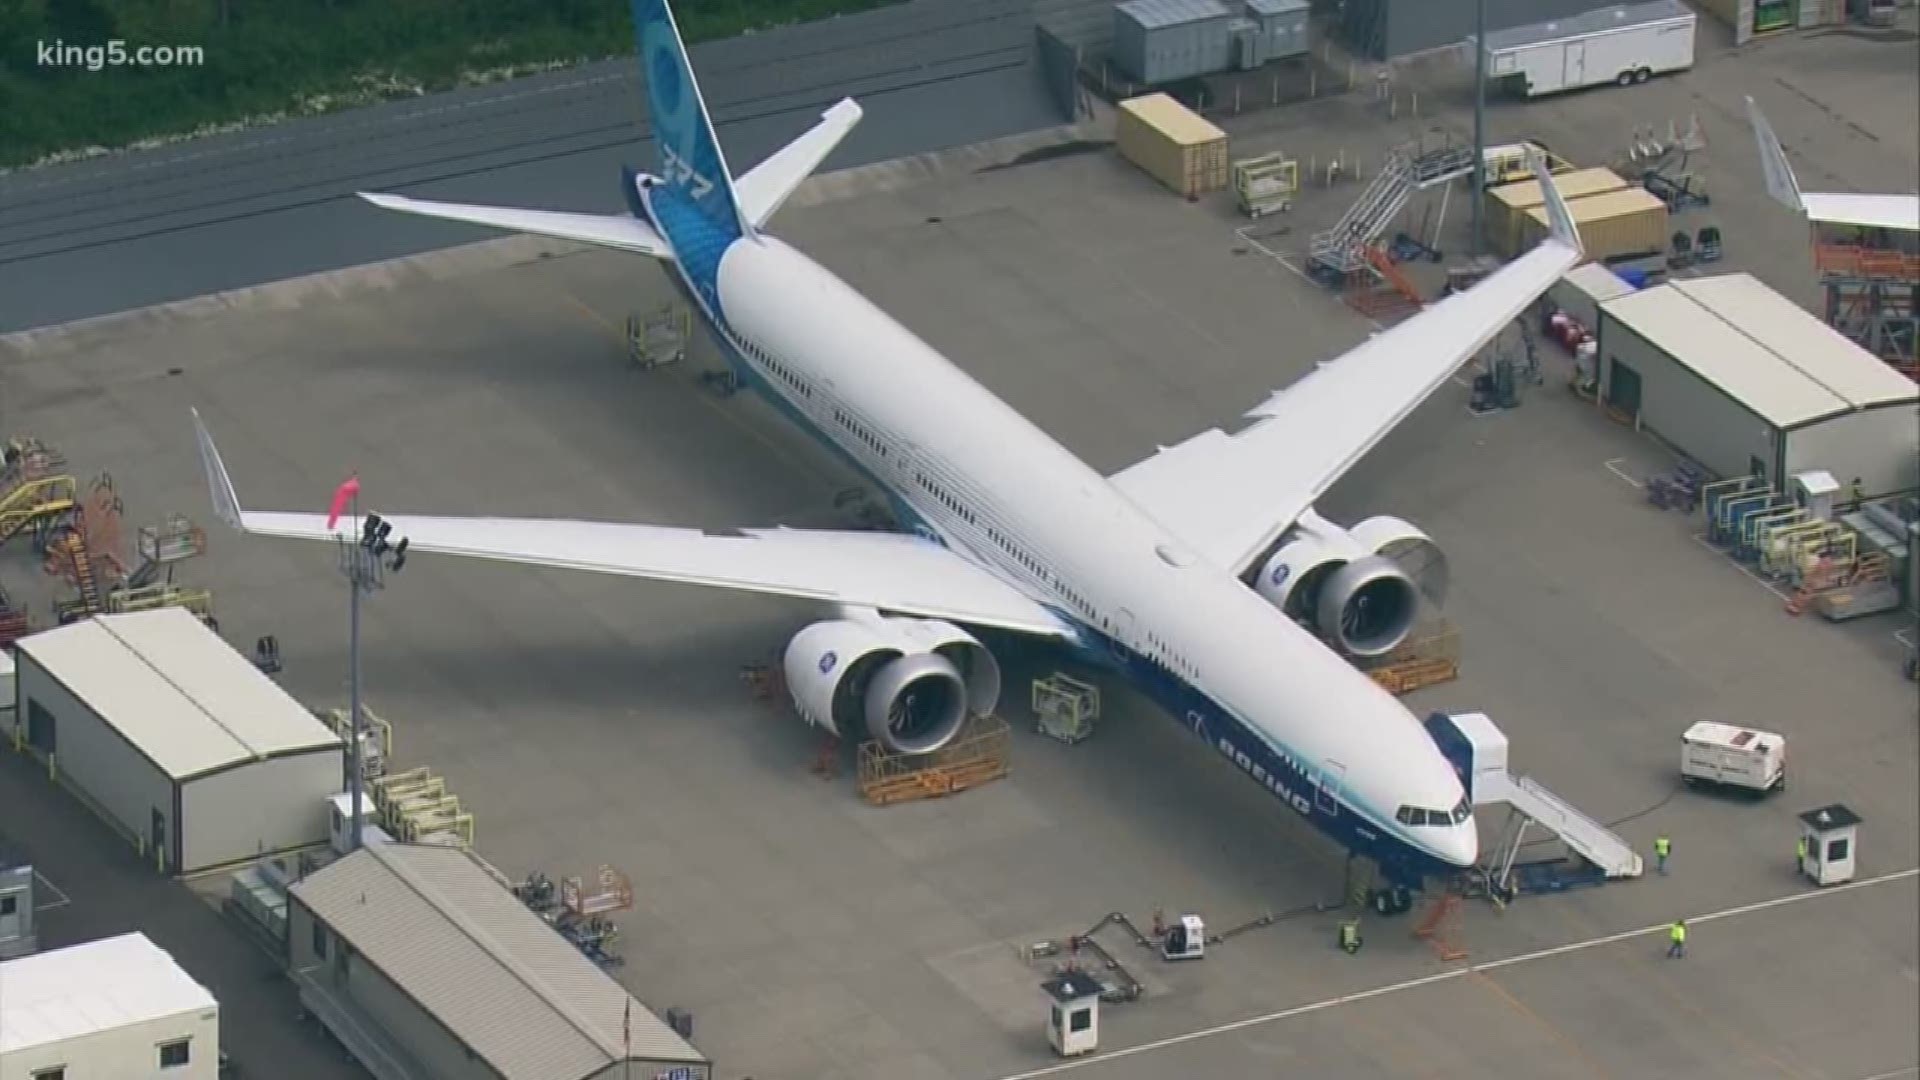 This year Boeing rolled out it's newest jewel, the 777X.  But few outside of the company noticed.  KING 5's Glenn Farley explains what's happening.